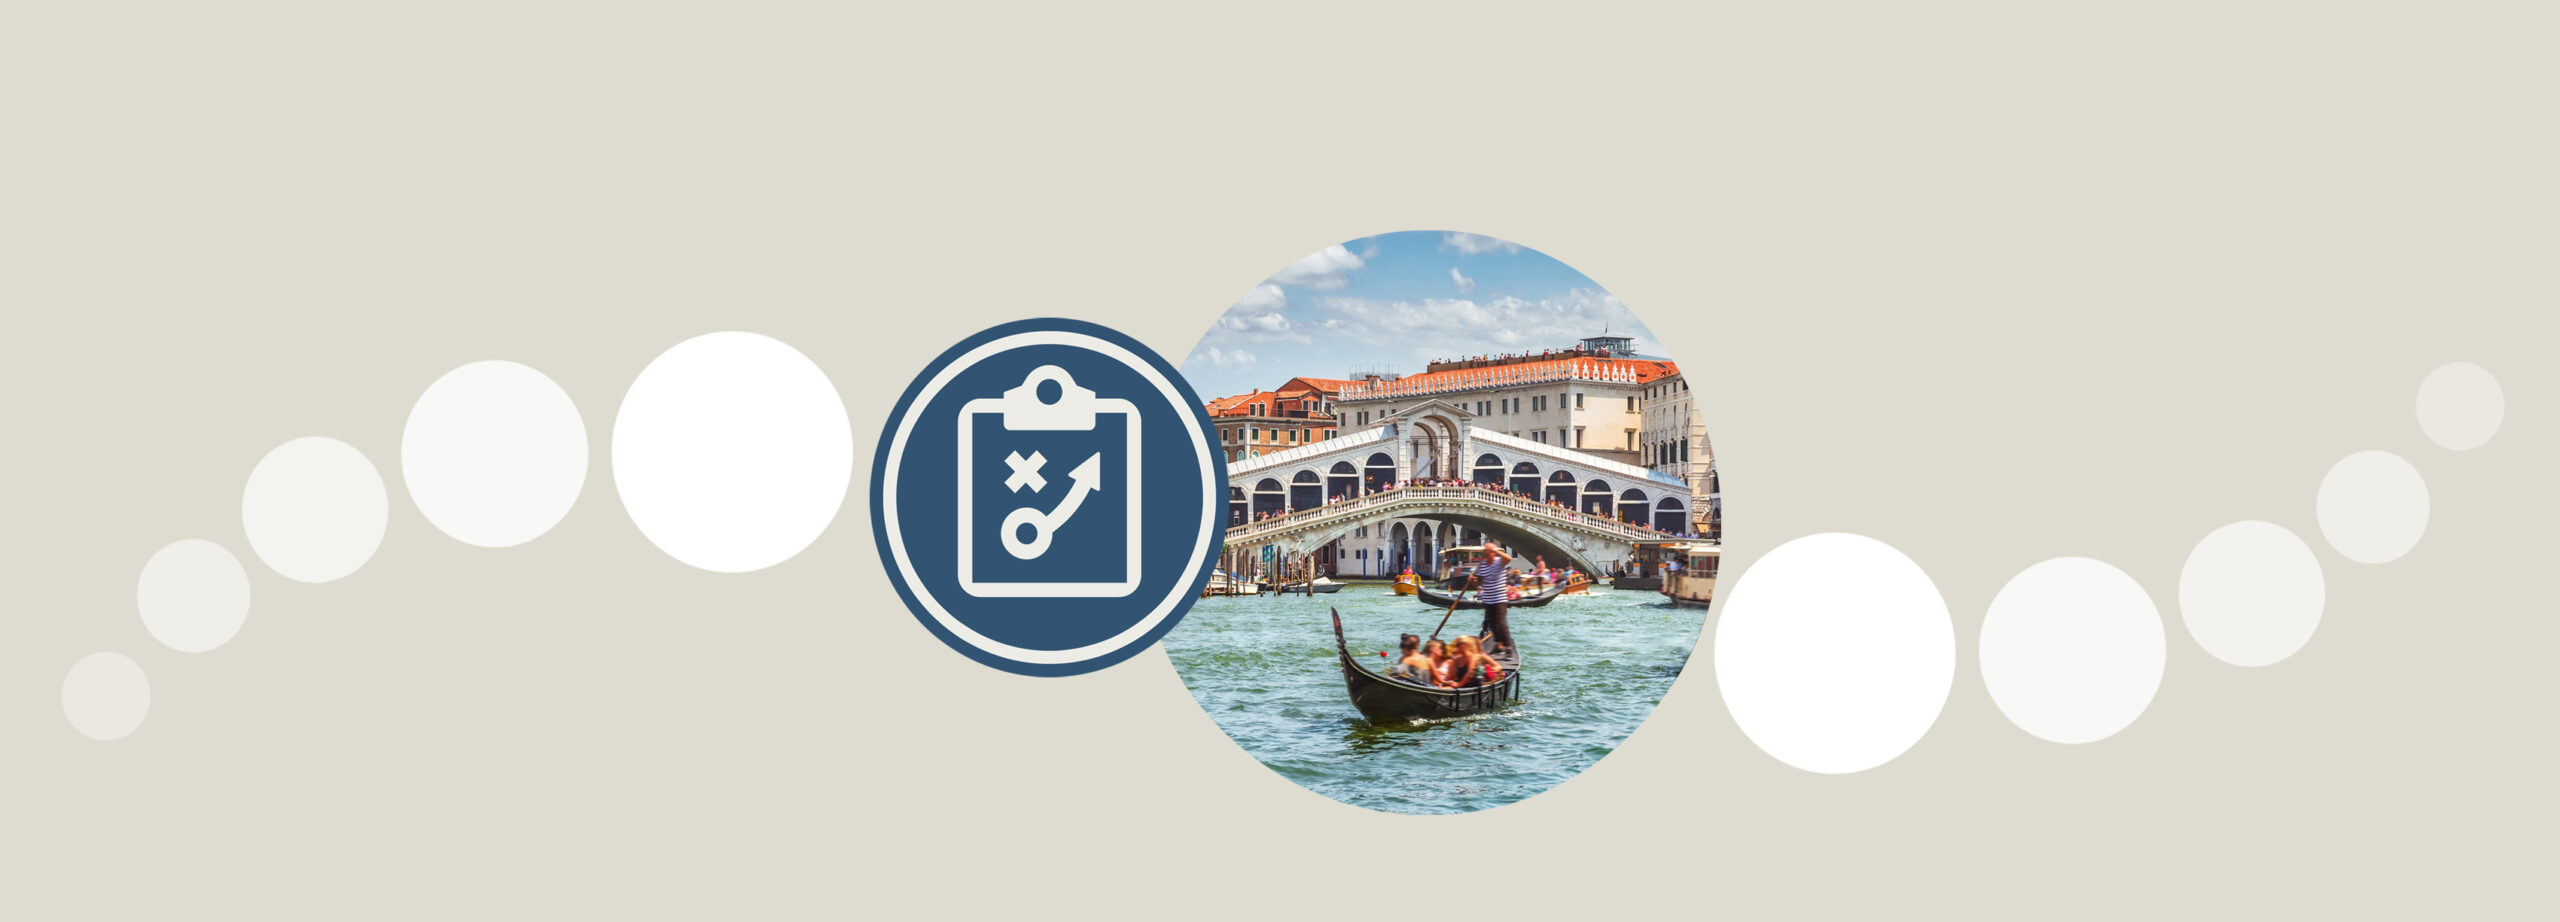 Bridge Rialto, spanning Venice's Grand Canal, typifies the drive it takes to reach one's goals. Individual coaching can bring goals into focus and pave a path to achieve them.